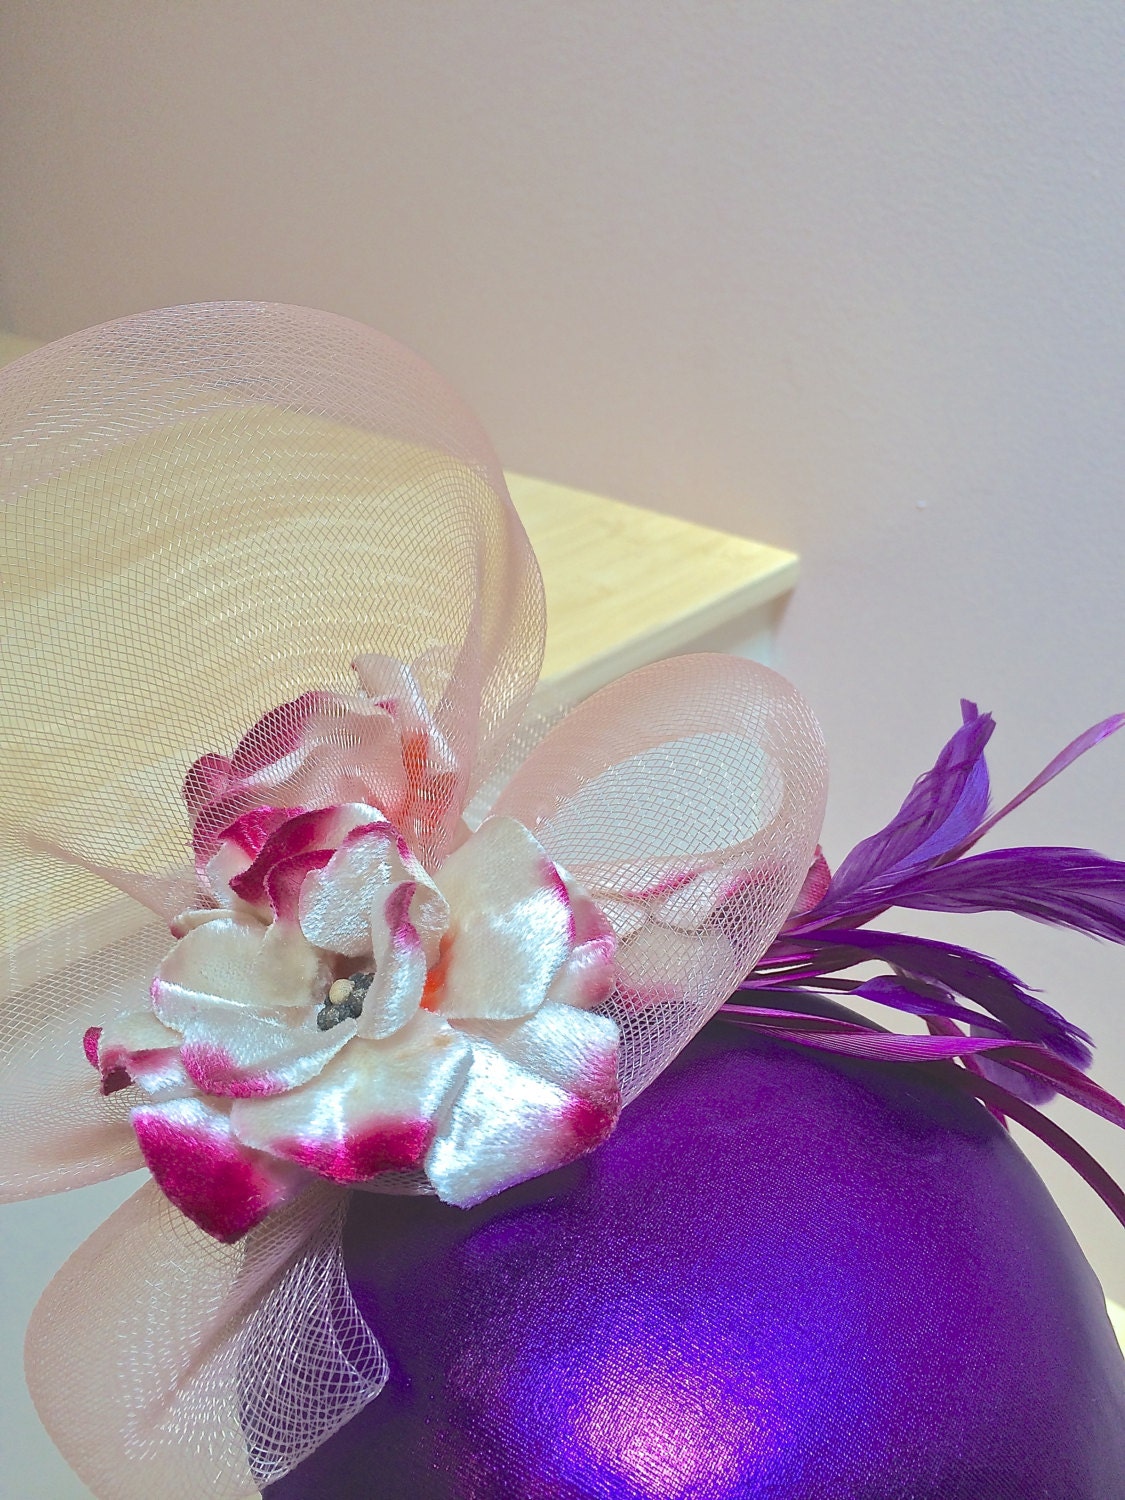 Radiant Orchid Fascinator, Purple fabric covered Fascinator with Crinoline and feathers, Wedding hat or Evening Cocktail Hat